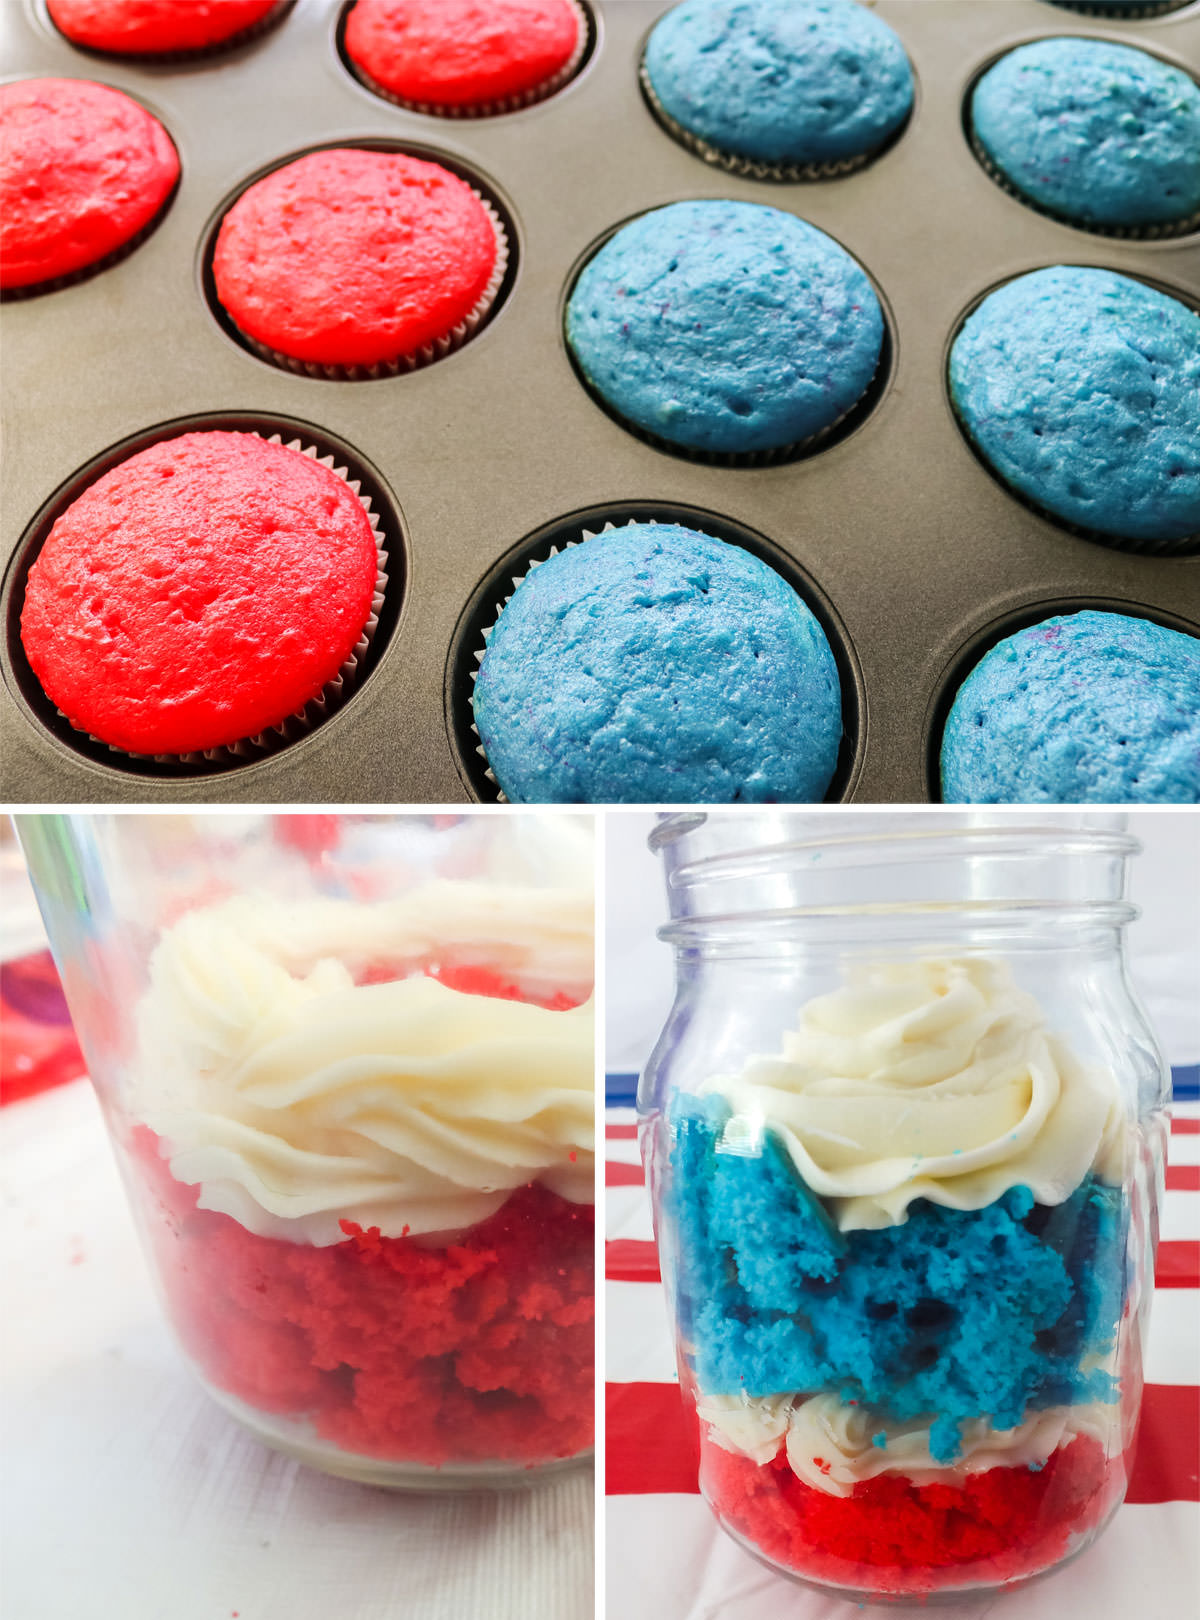 Collage image showing the steps on how to make Red White and Blue Cupcake in Jar.